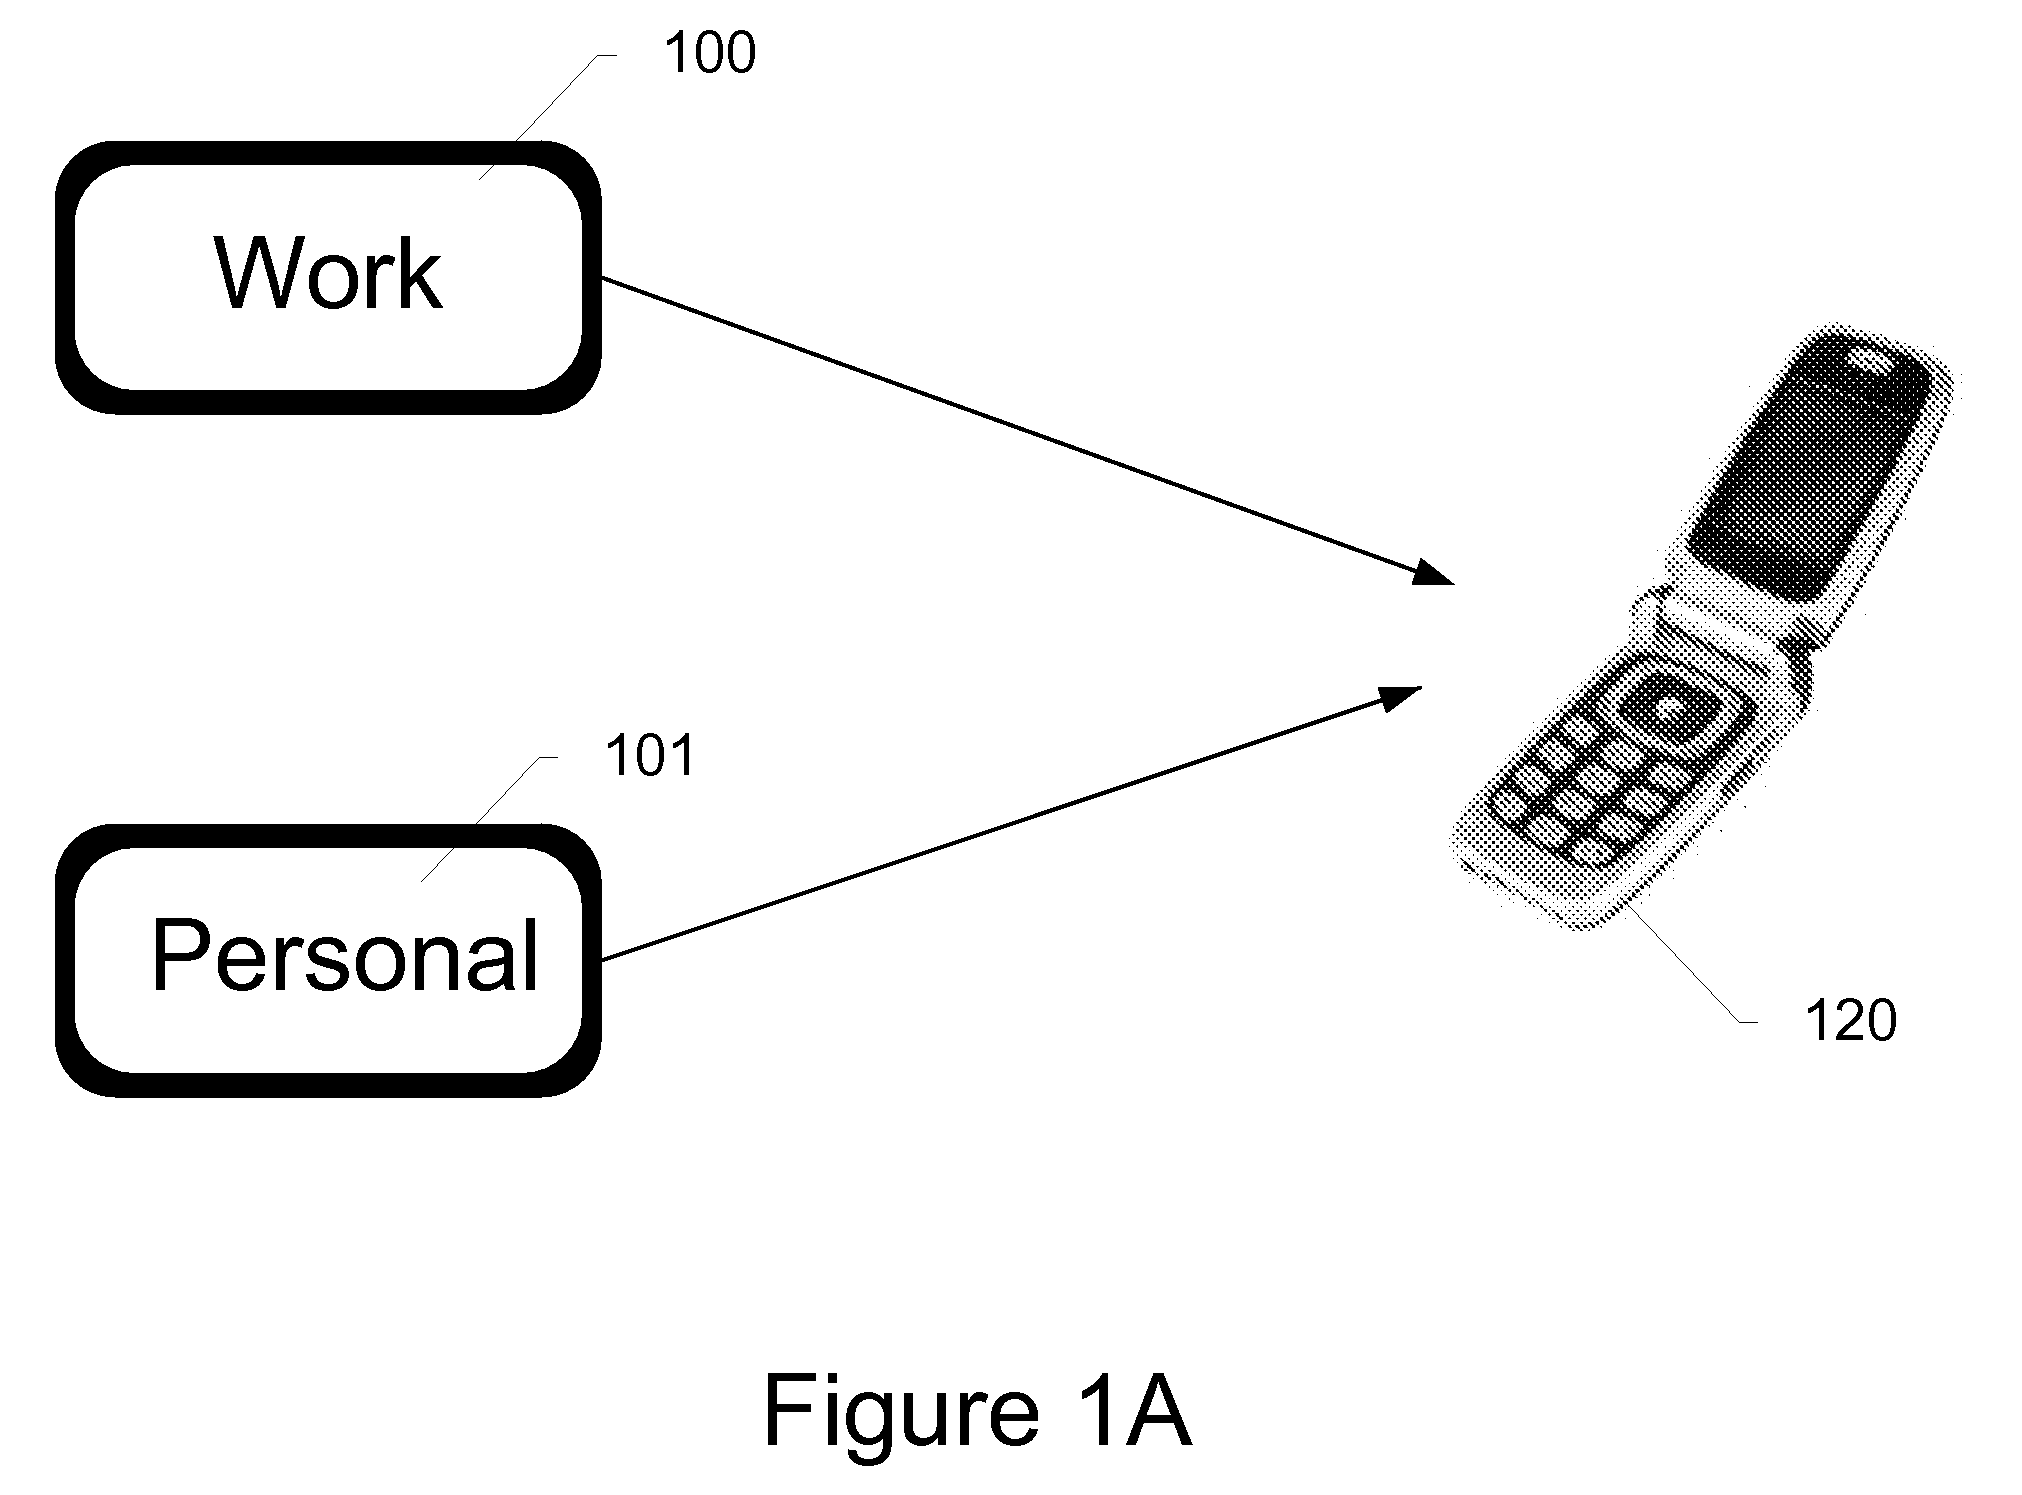 Systems and Methods for Multi-Device Wireless SIM Management